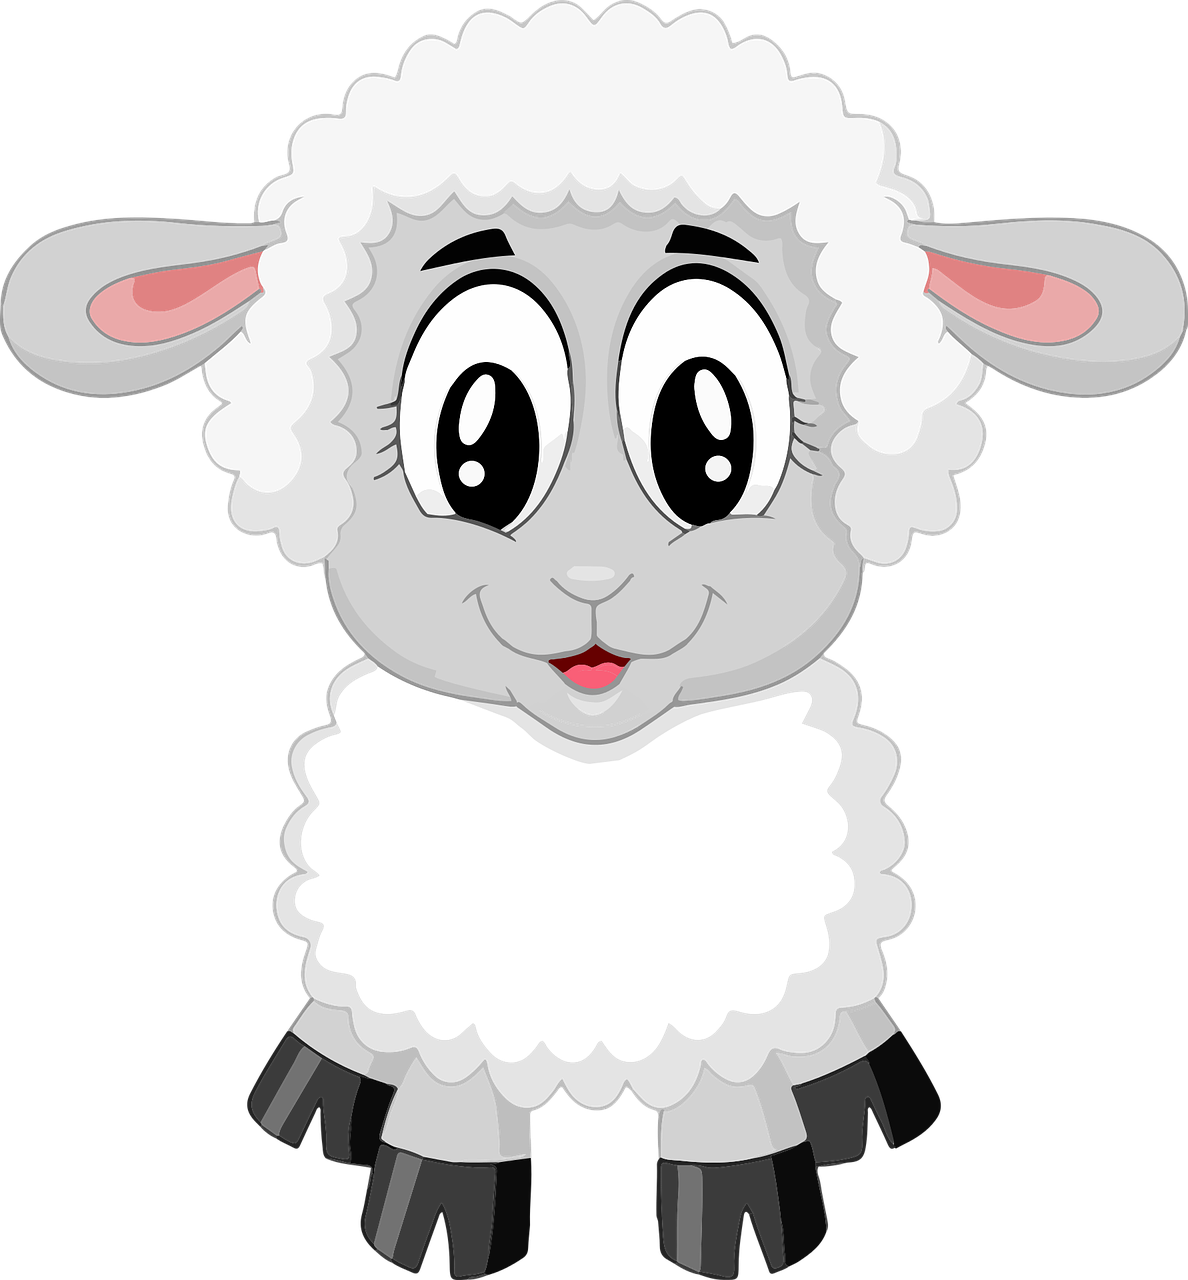 a close up of a sheep's face on a black background, a digital rendering, mingei, cute cartoon character, little bo peep, clipart, she is looking at us